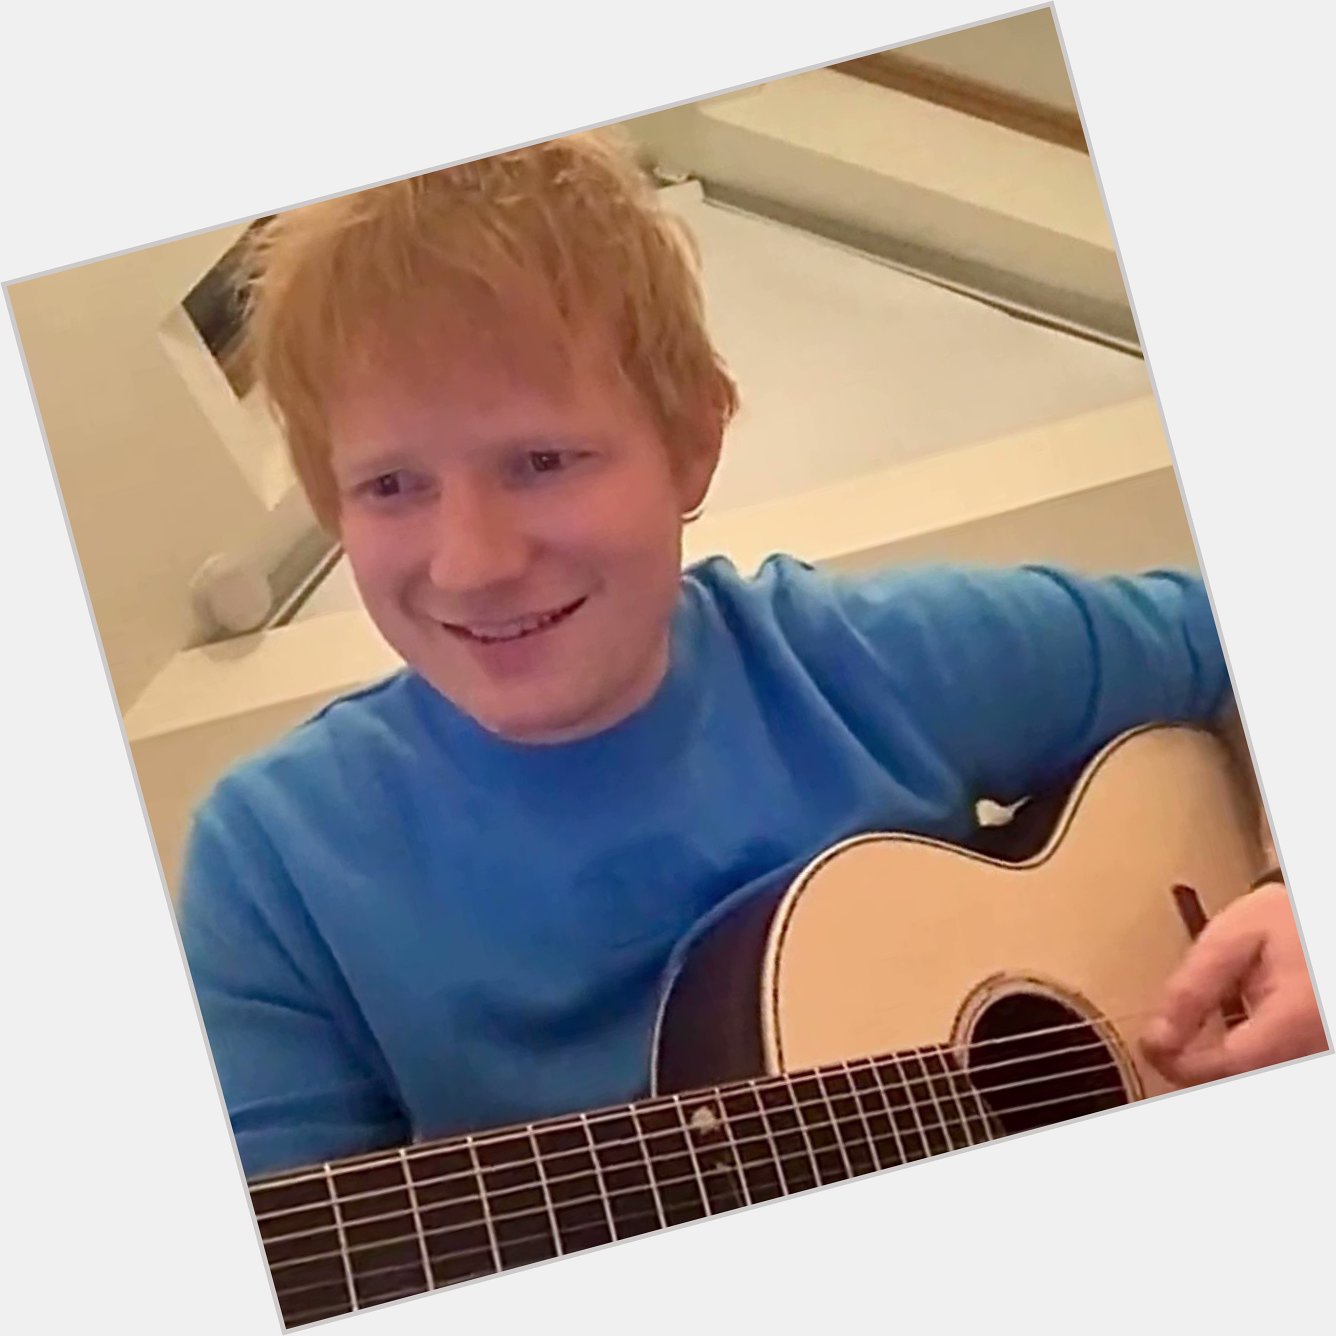 Happy birthday to Harry Styles!  Falling - cover by Ed Sheeran
